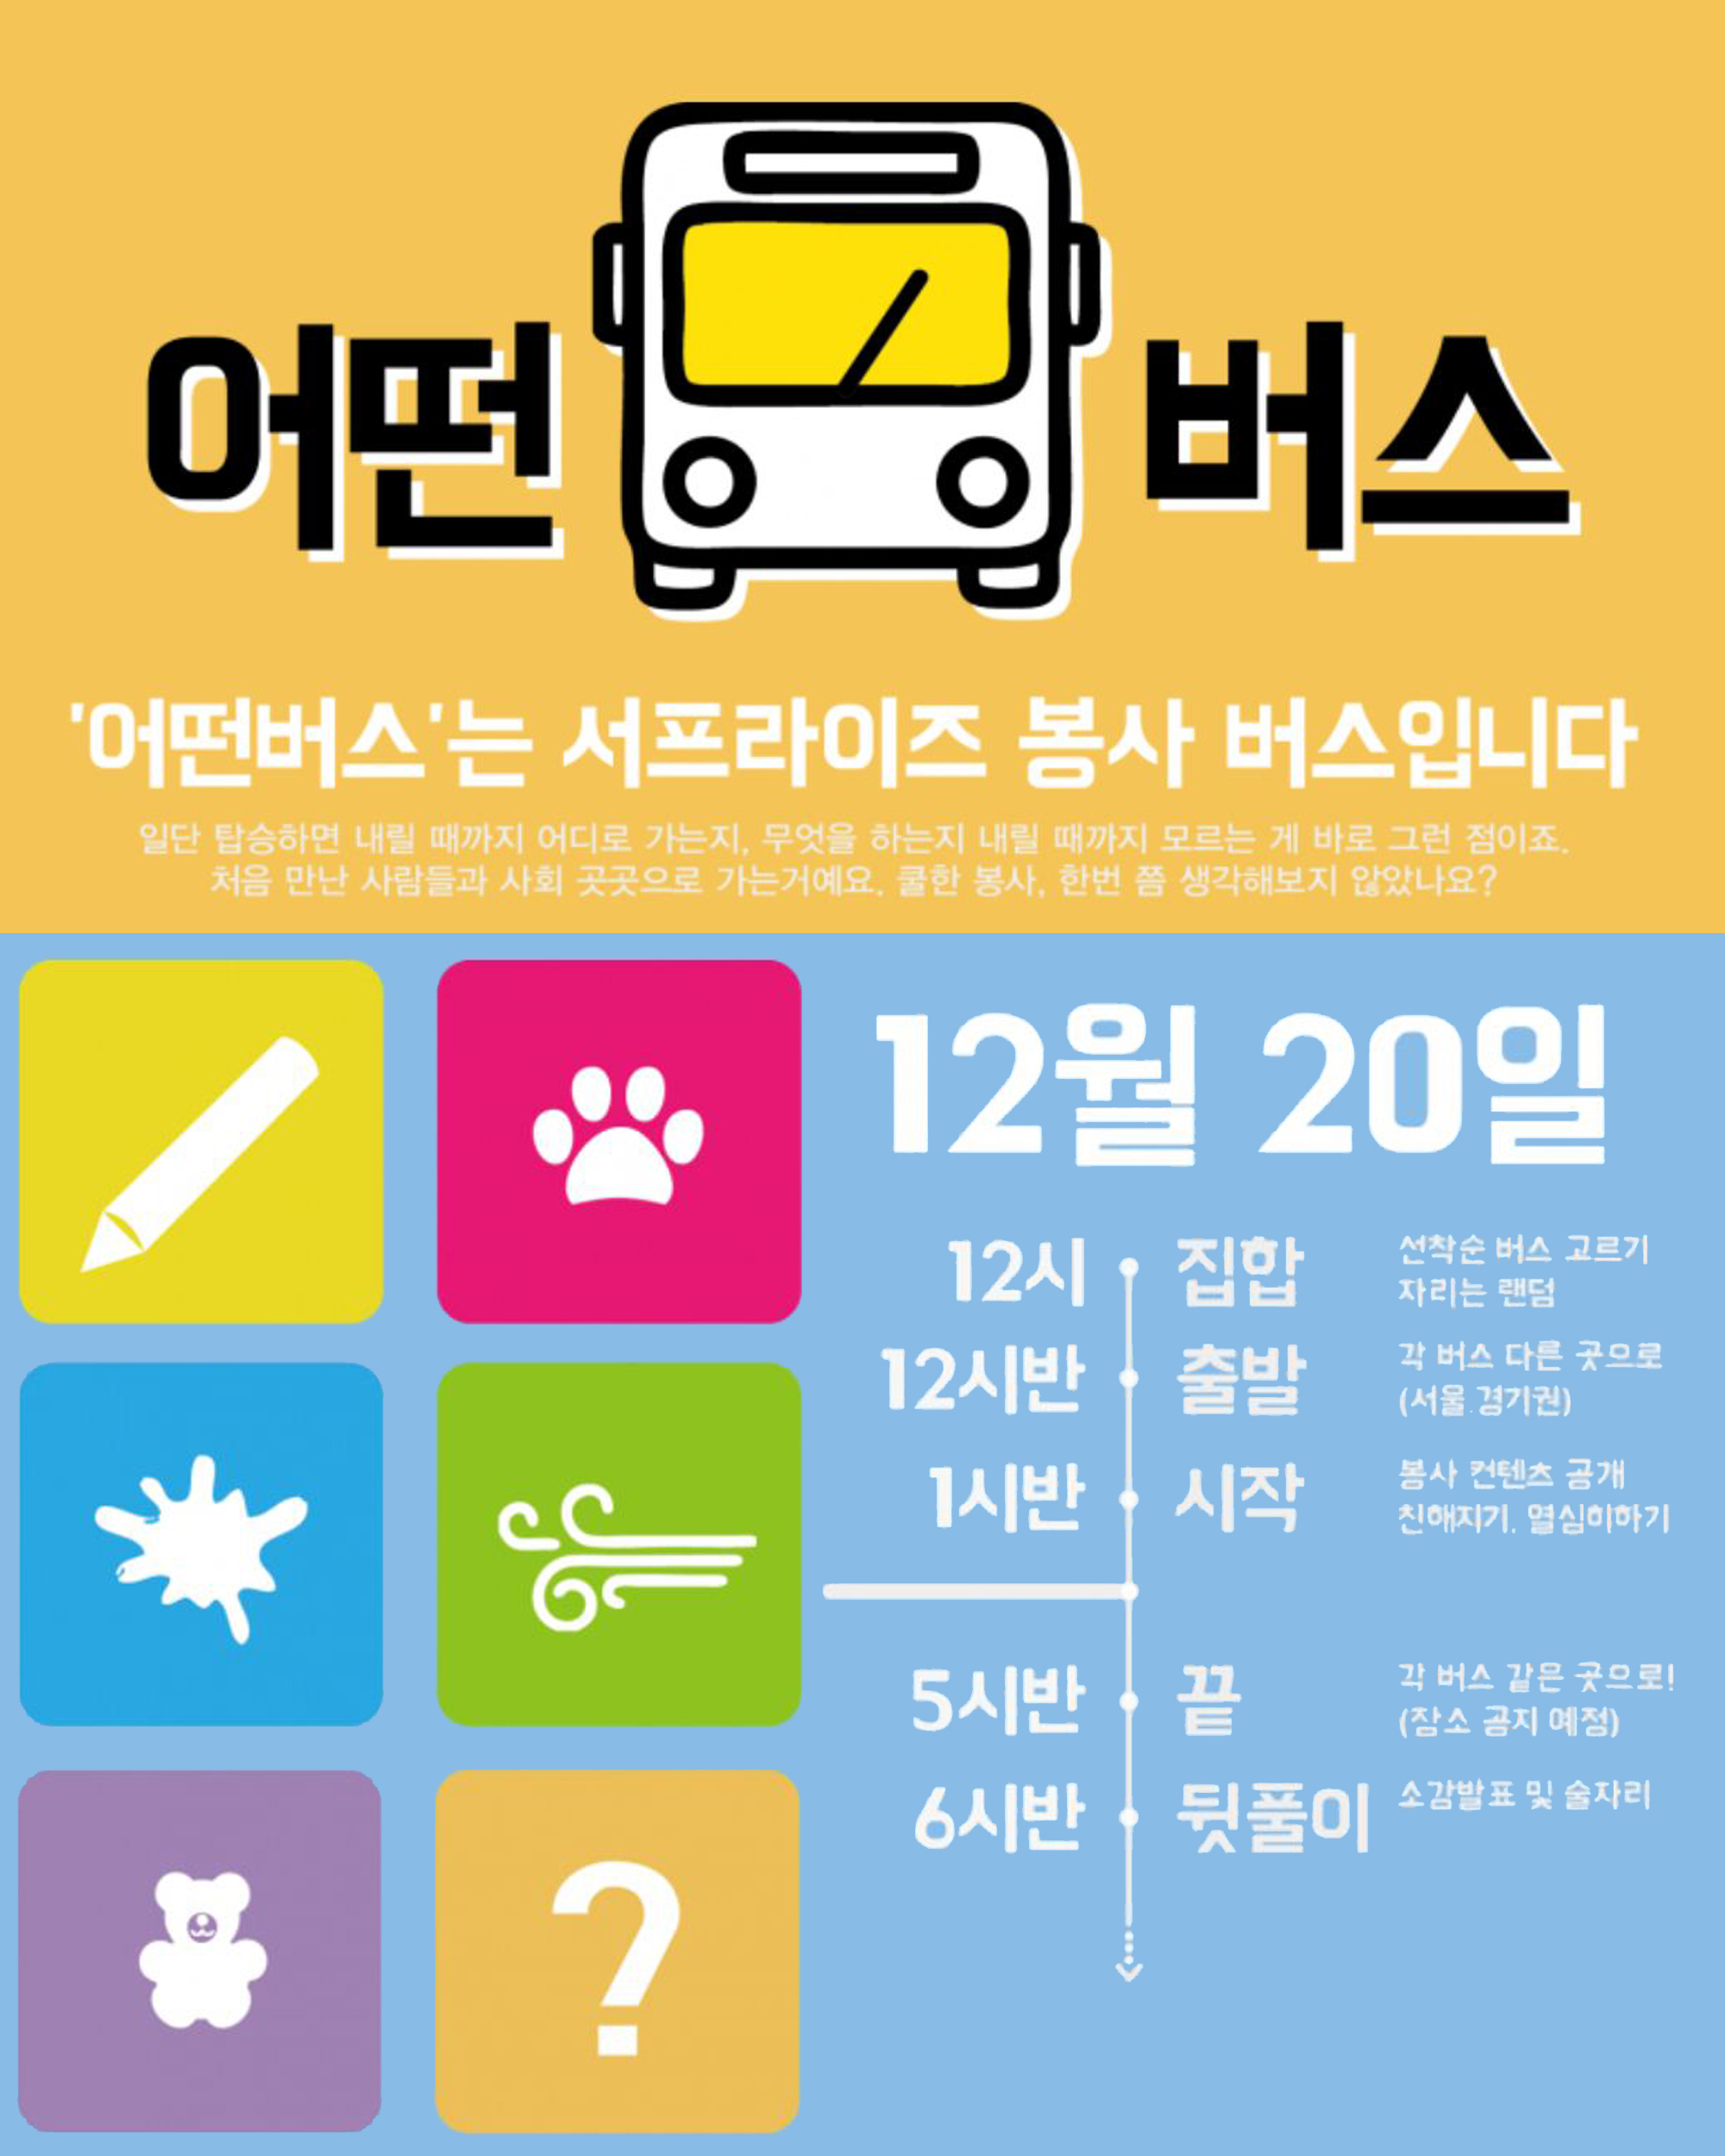 A Volunteer Project by Students: The Surprise Bus! 이미지